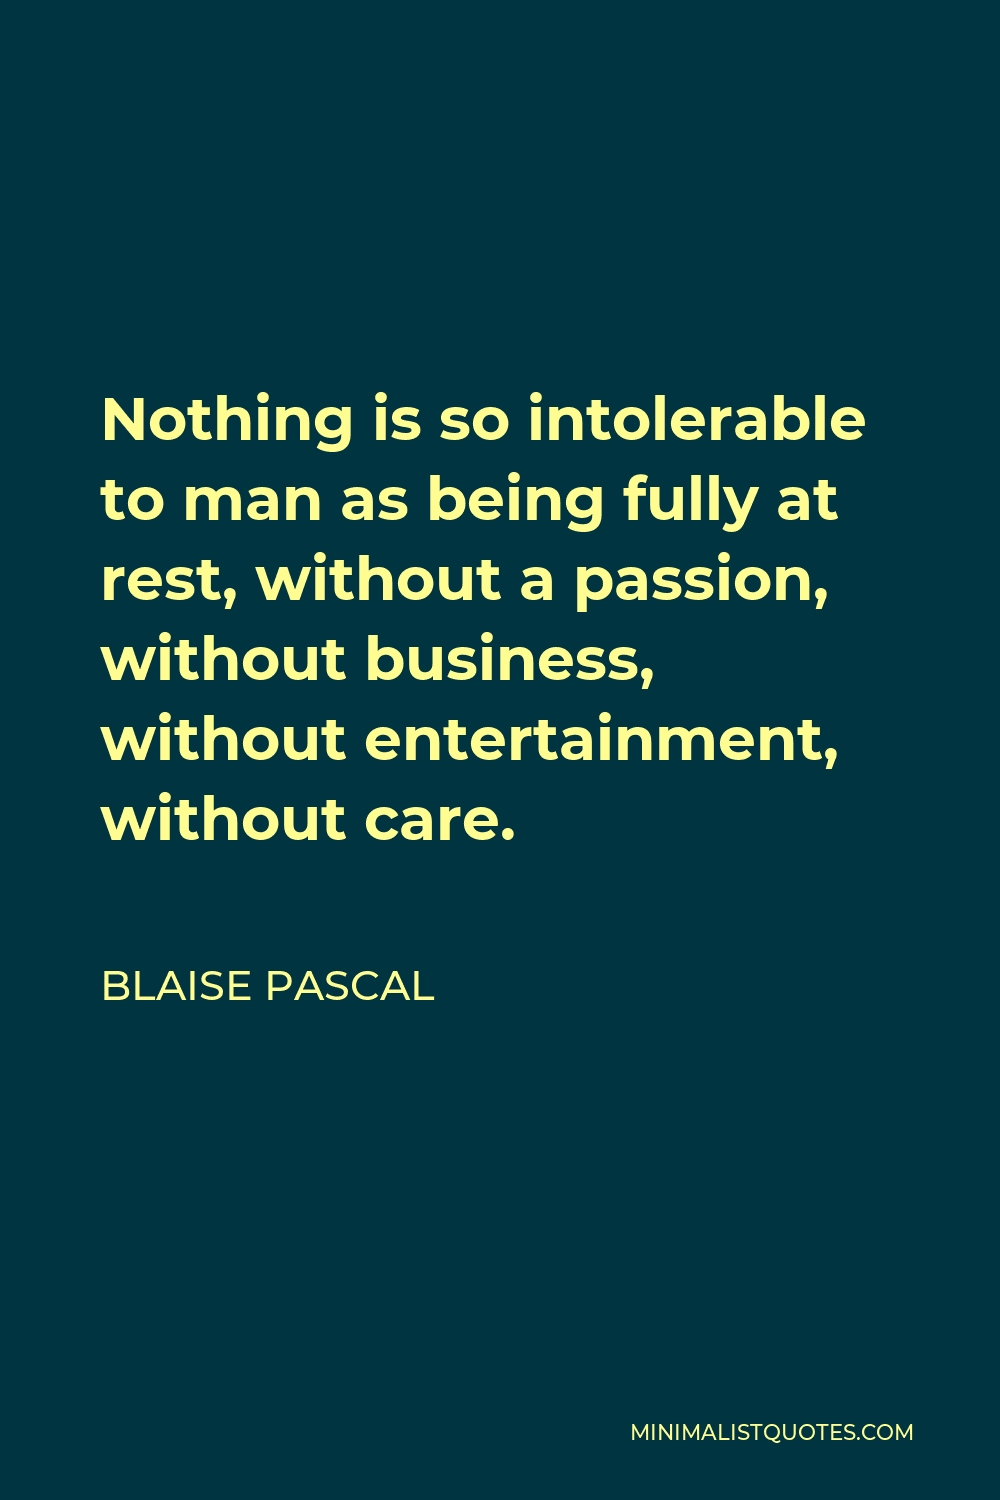 Blaise Pascal Quote - Nothing is so intolerable to man as being fully at rest, without a passion, without business, without entertainment, without care.